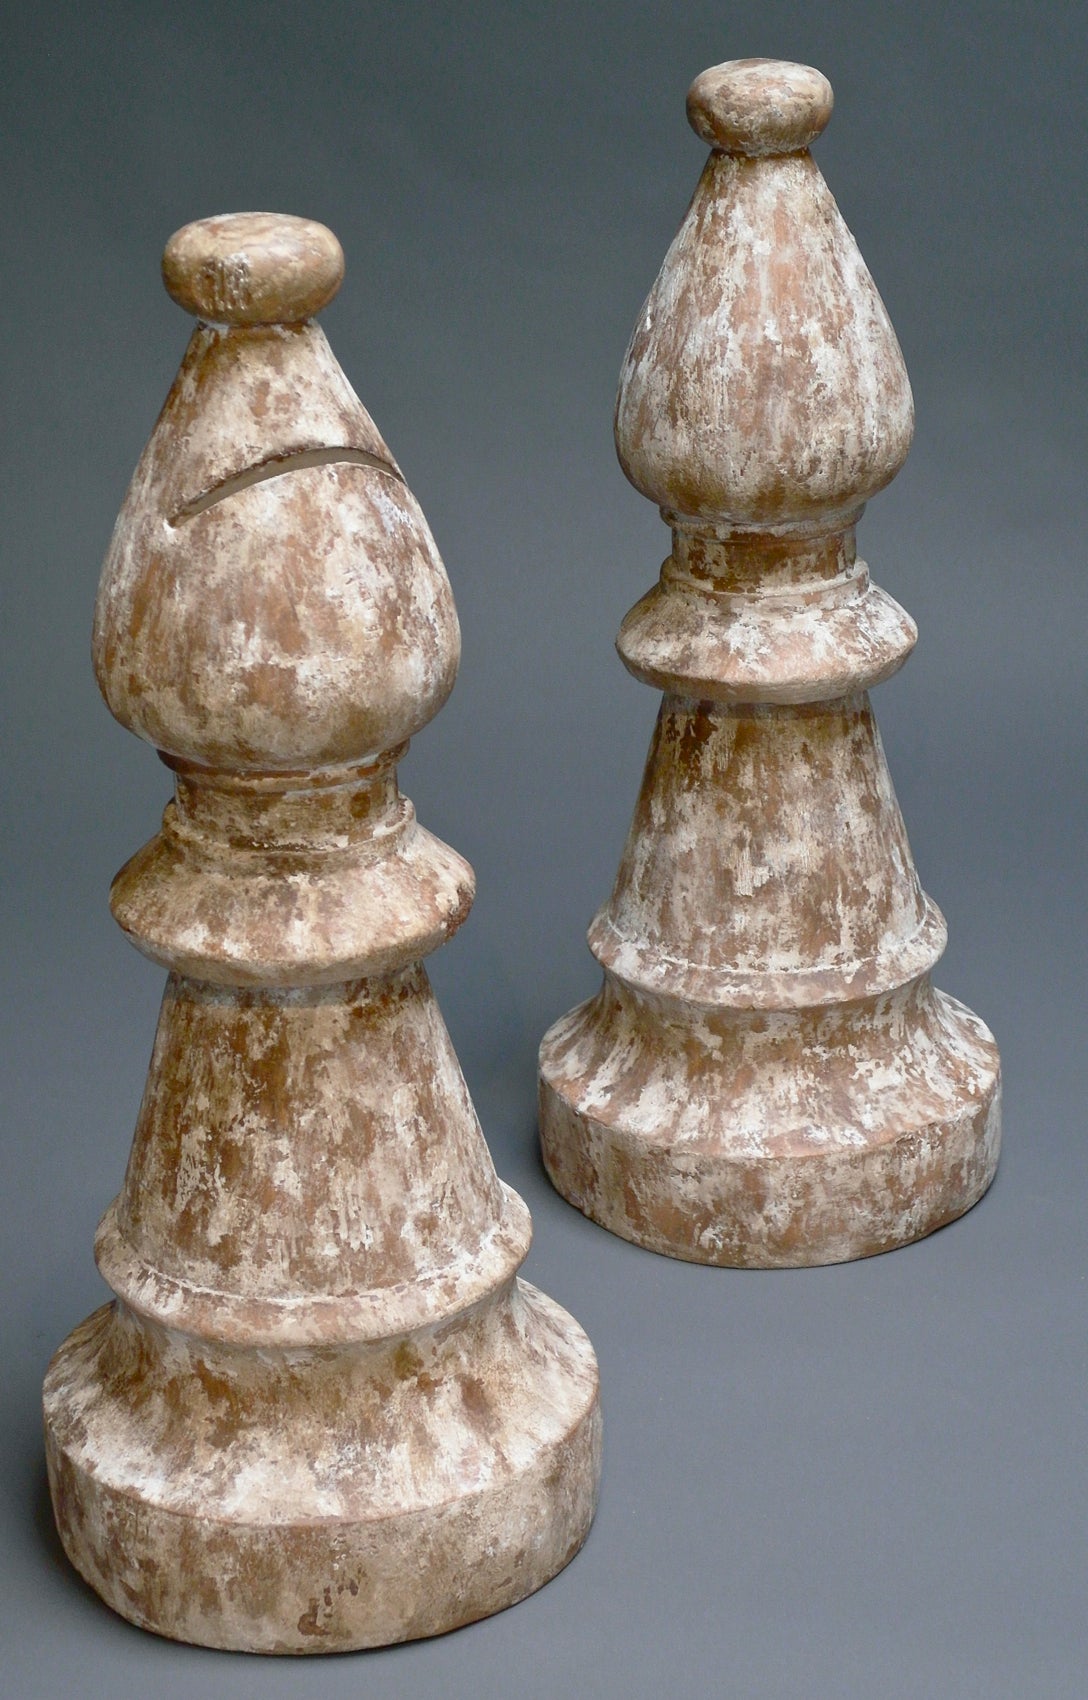 Monumental Faux Wood Chess Pieces